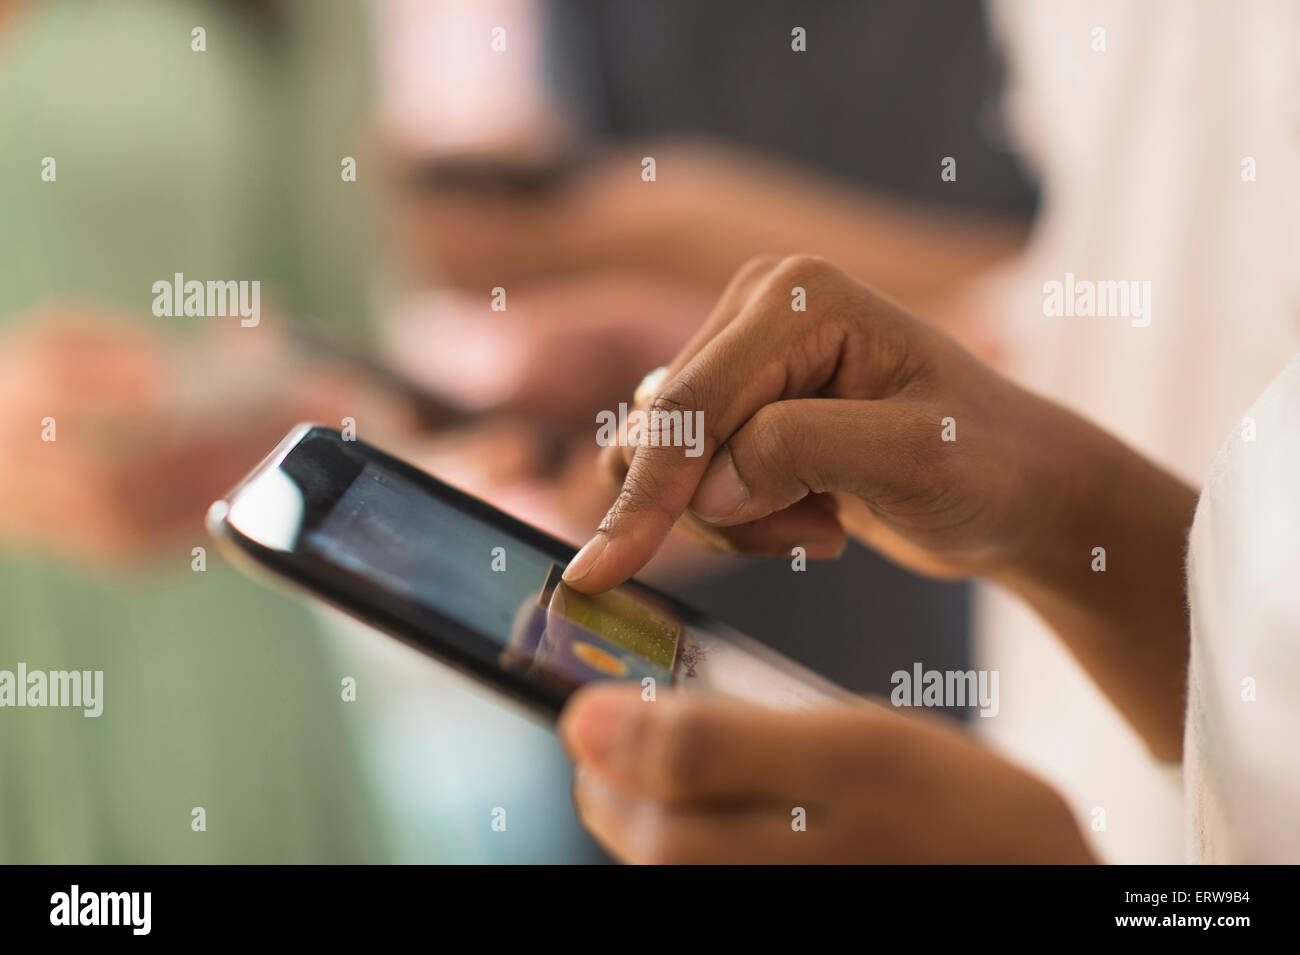 Close up of woman using cell phone touch screen Stock Photo